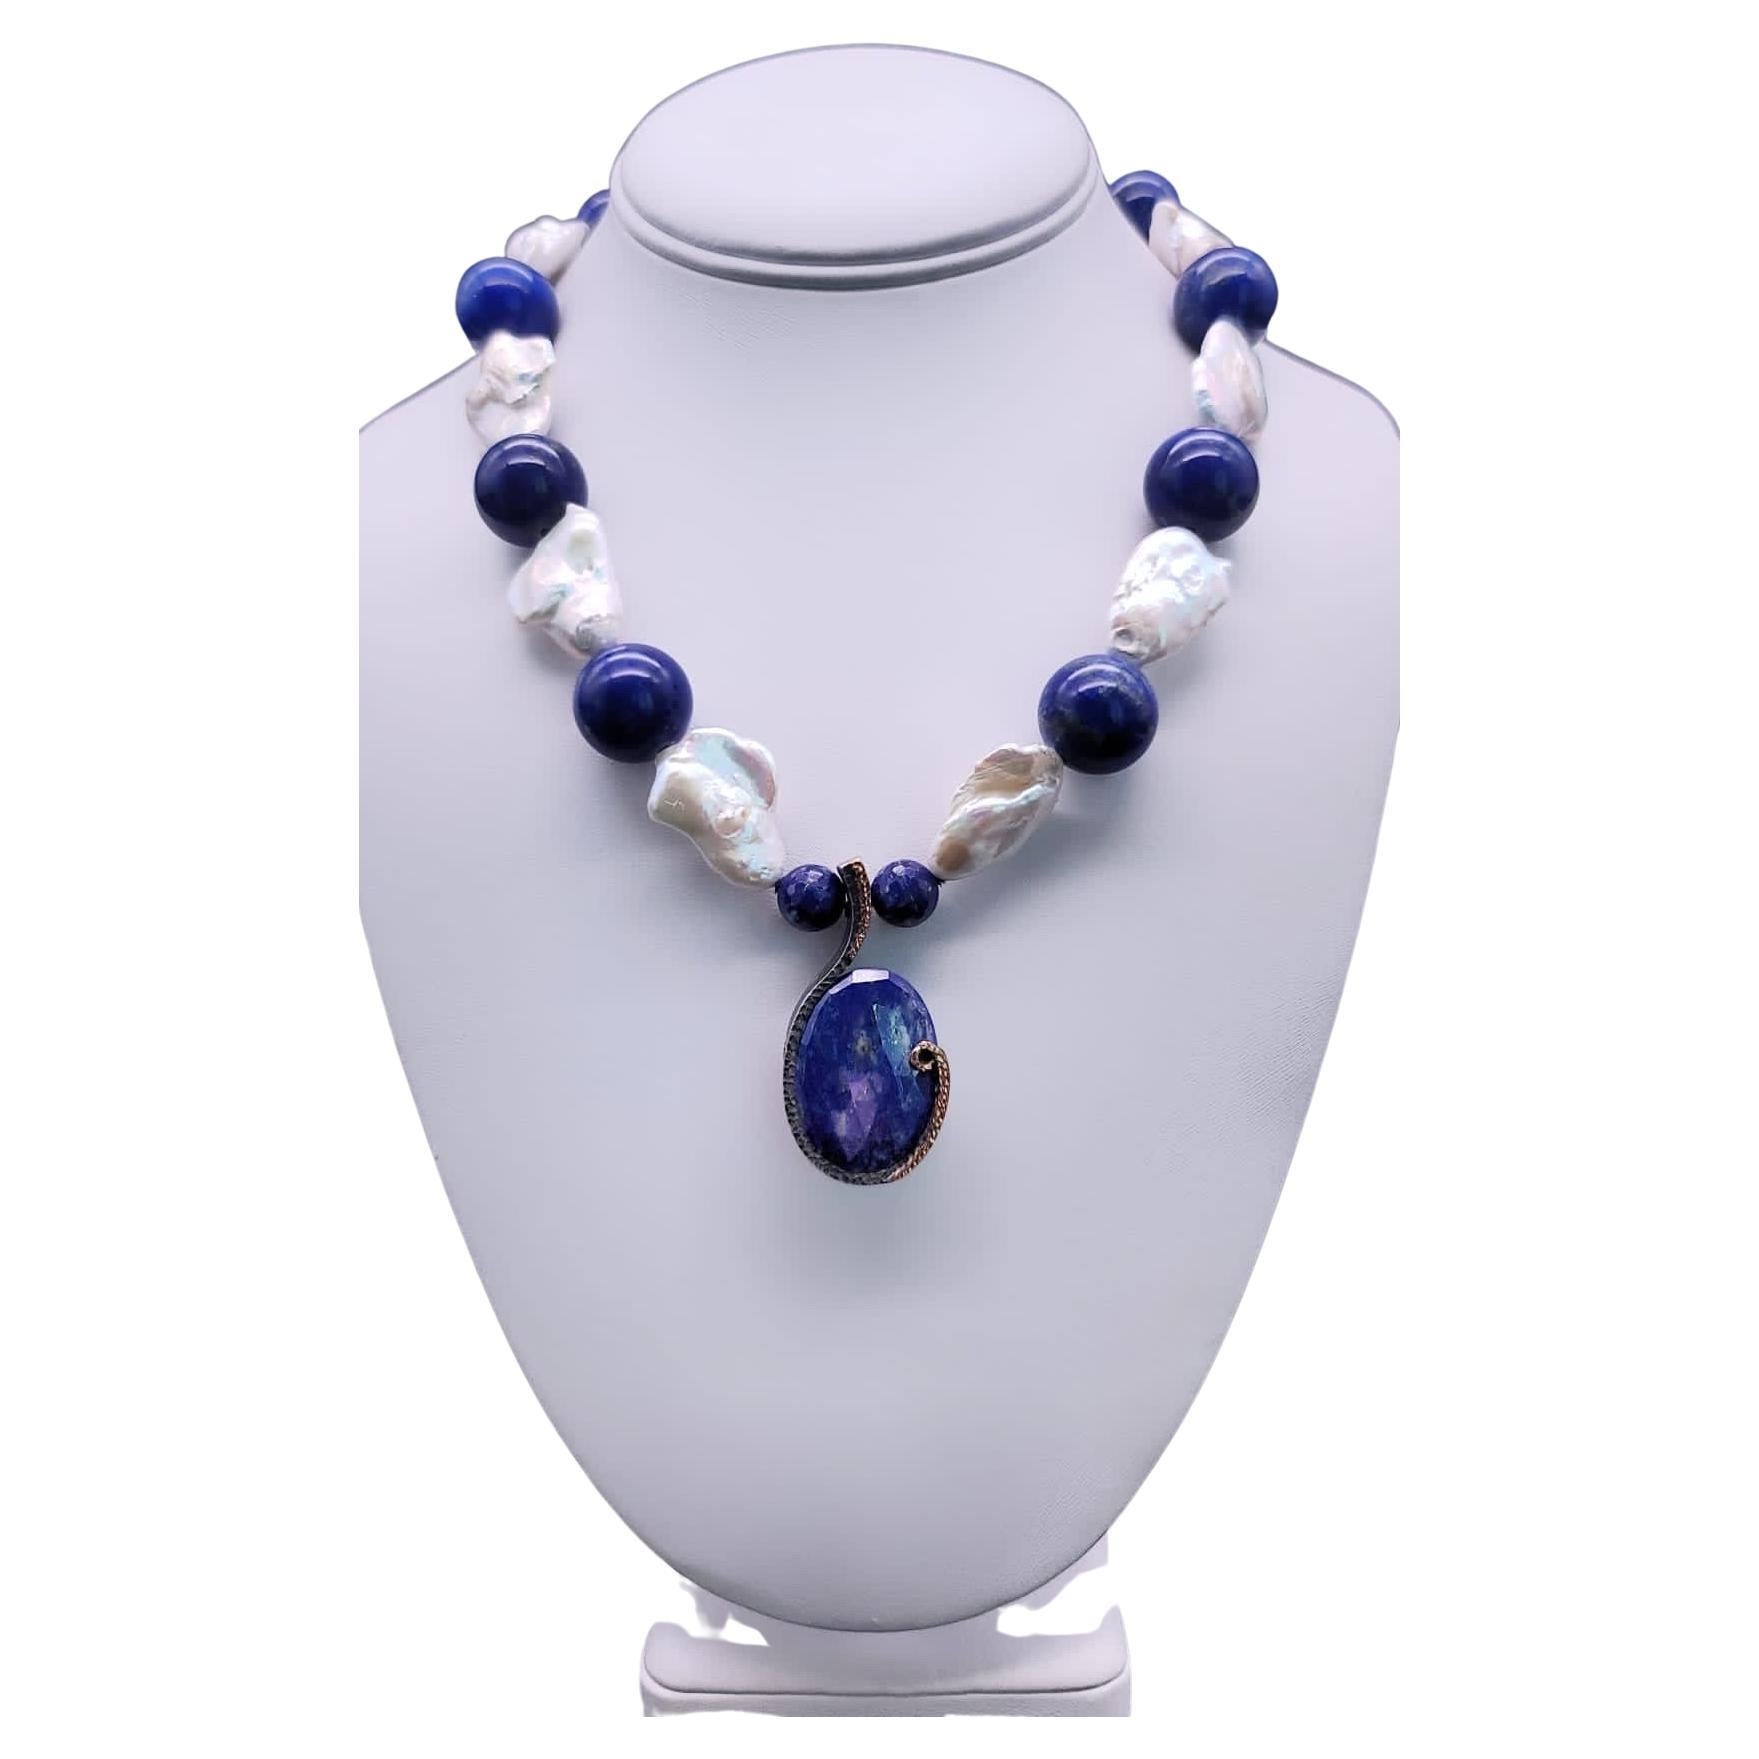 A.Jeschel Stunning Lapis and Baroque Pearls necklace.